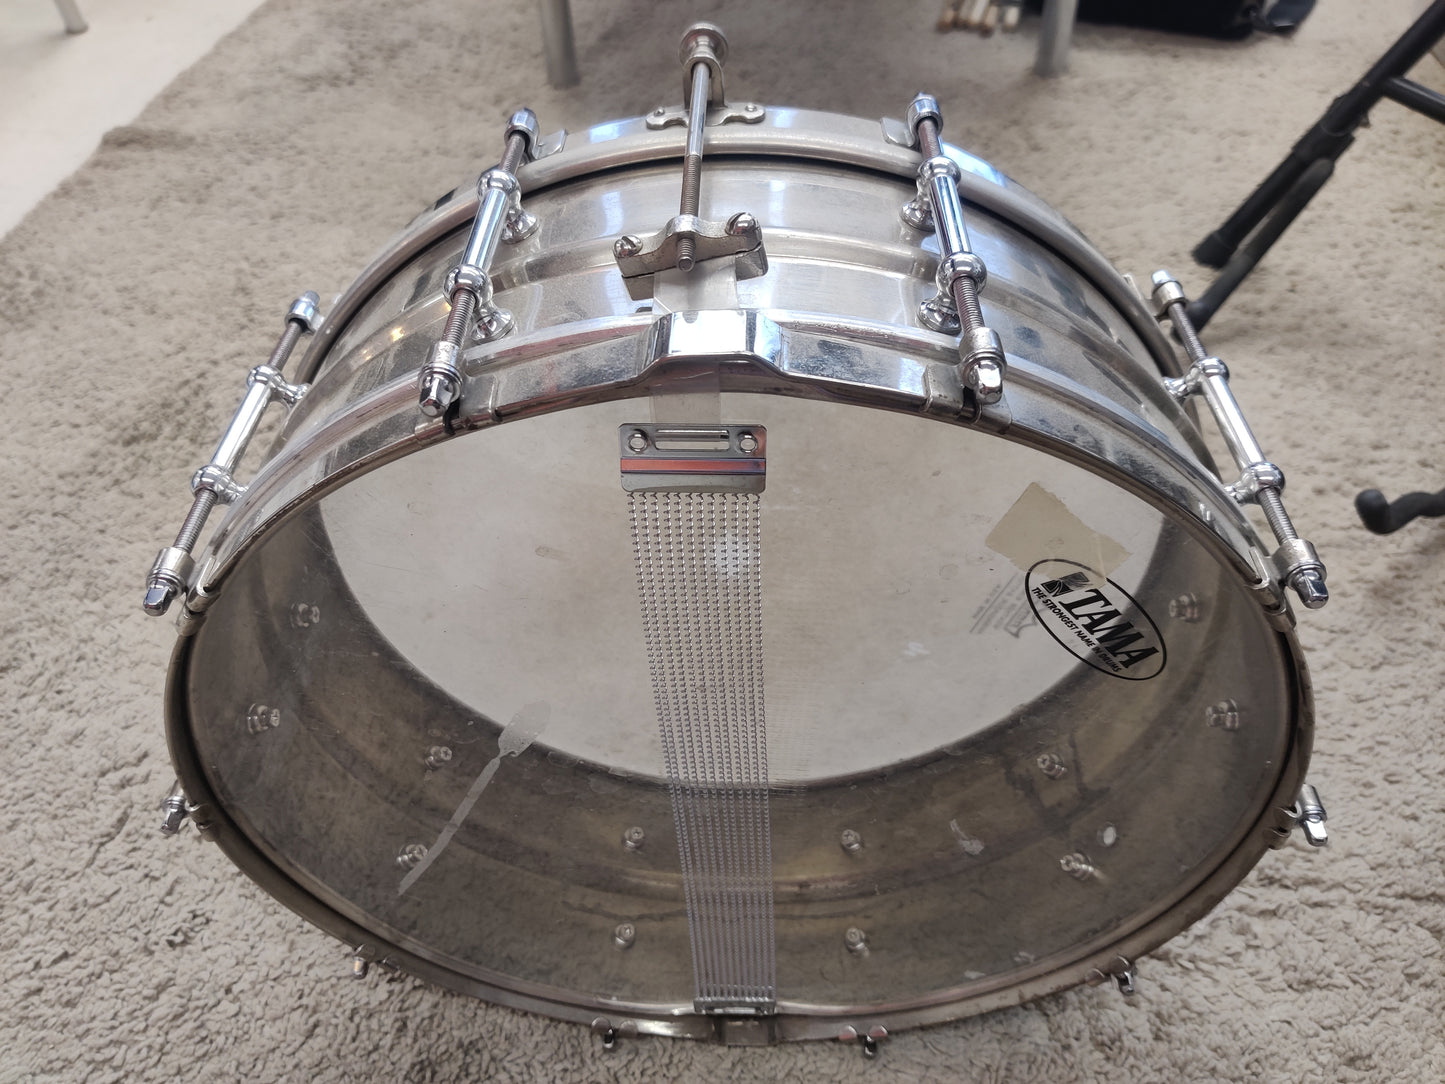 Gretsch early 1900s snare drum - Aron Soitin